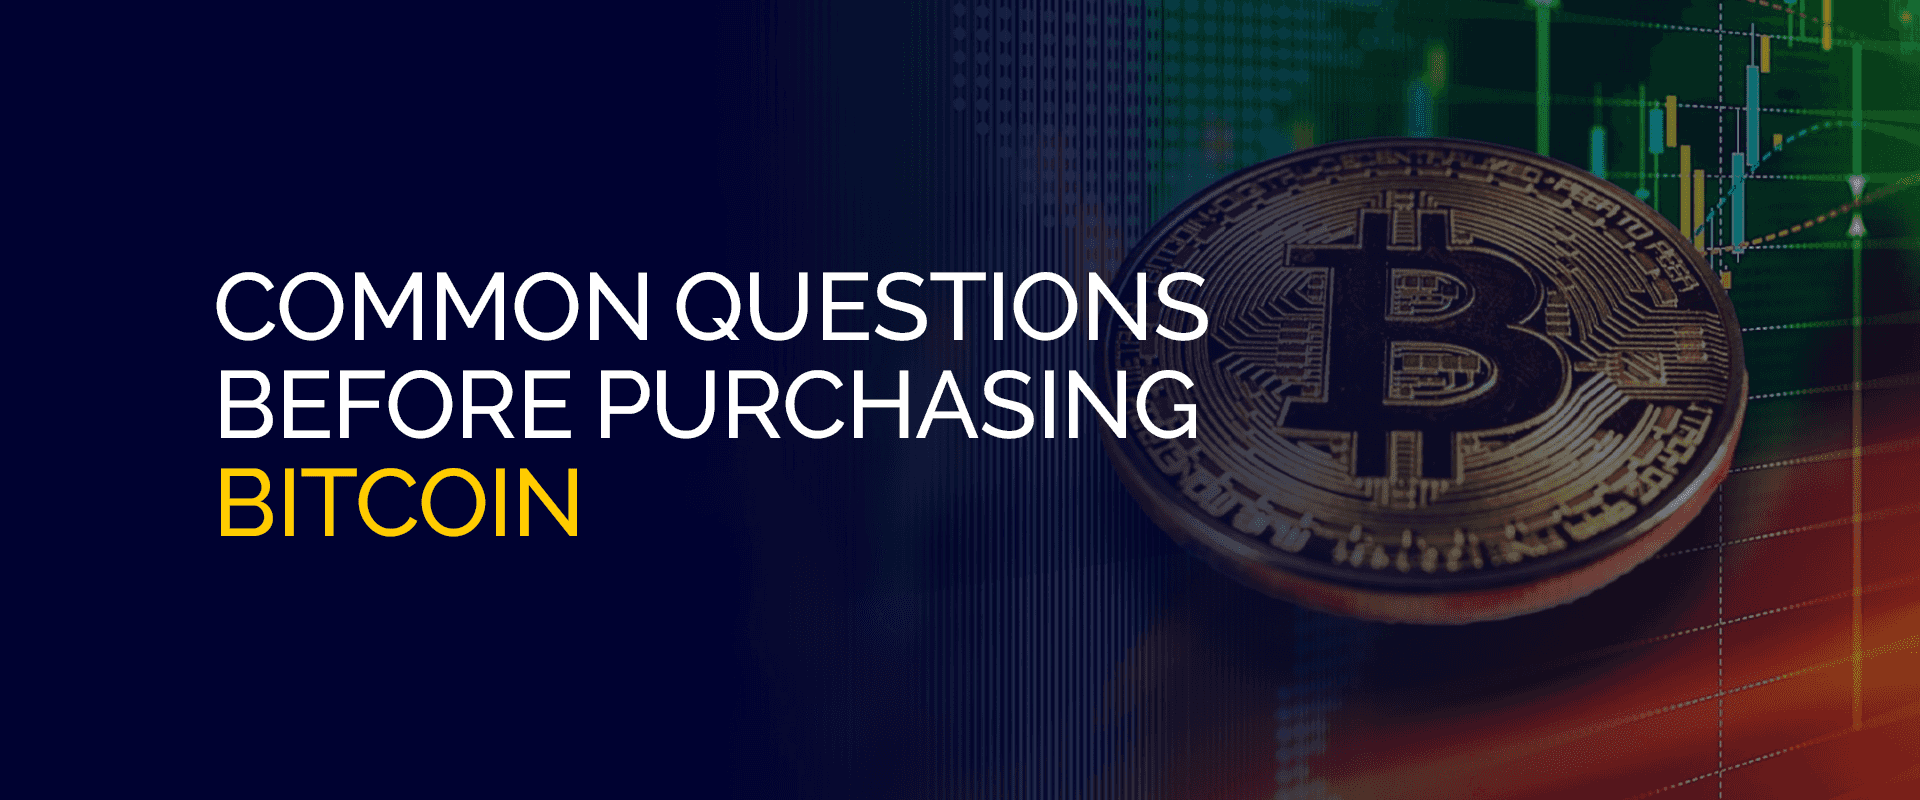 Common Questions Before Purchasing Bitcoin